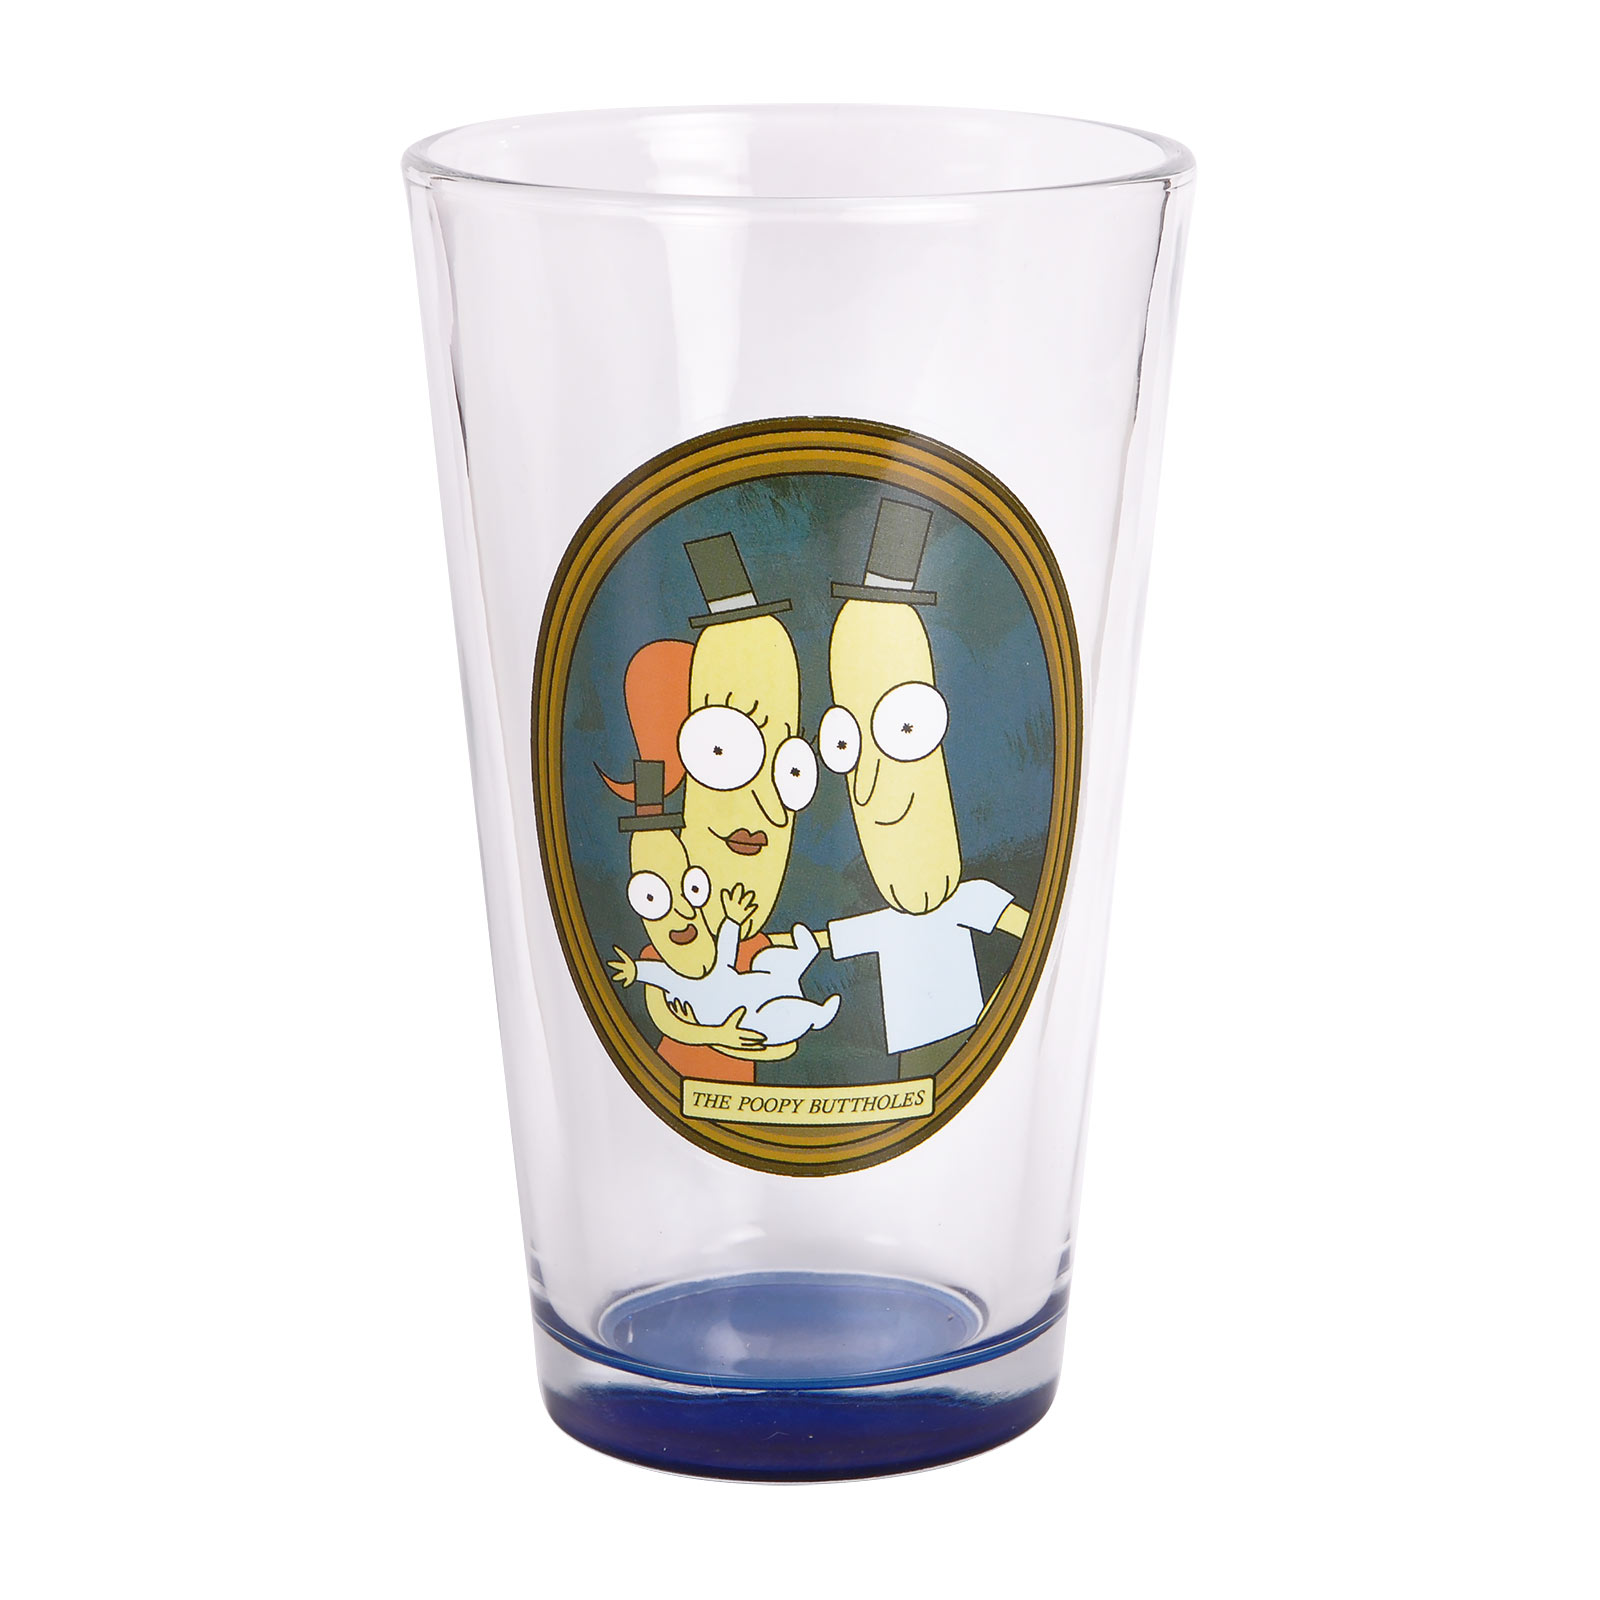 Rick and Morty - Poopybutthole Family Glas